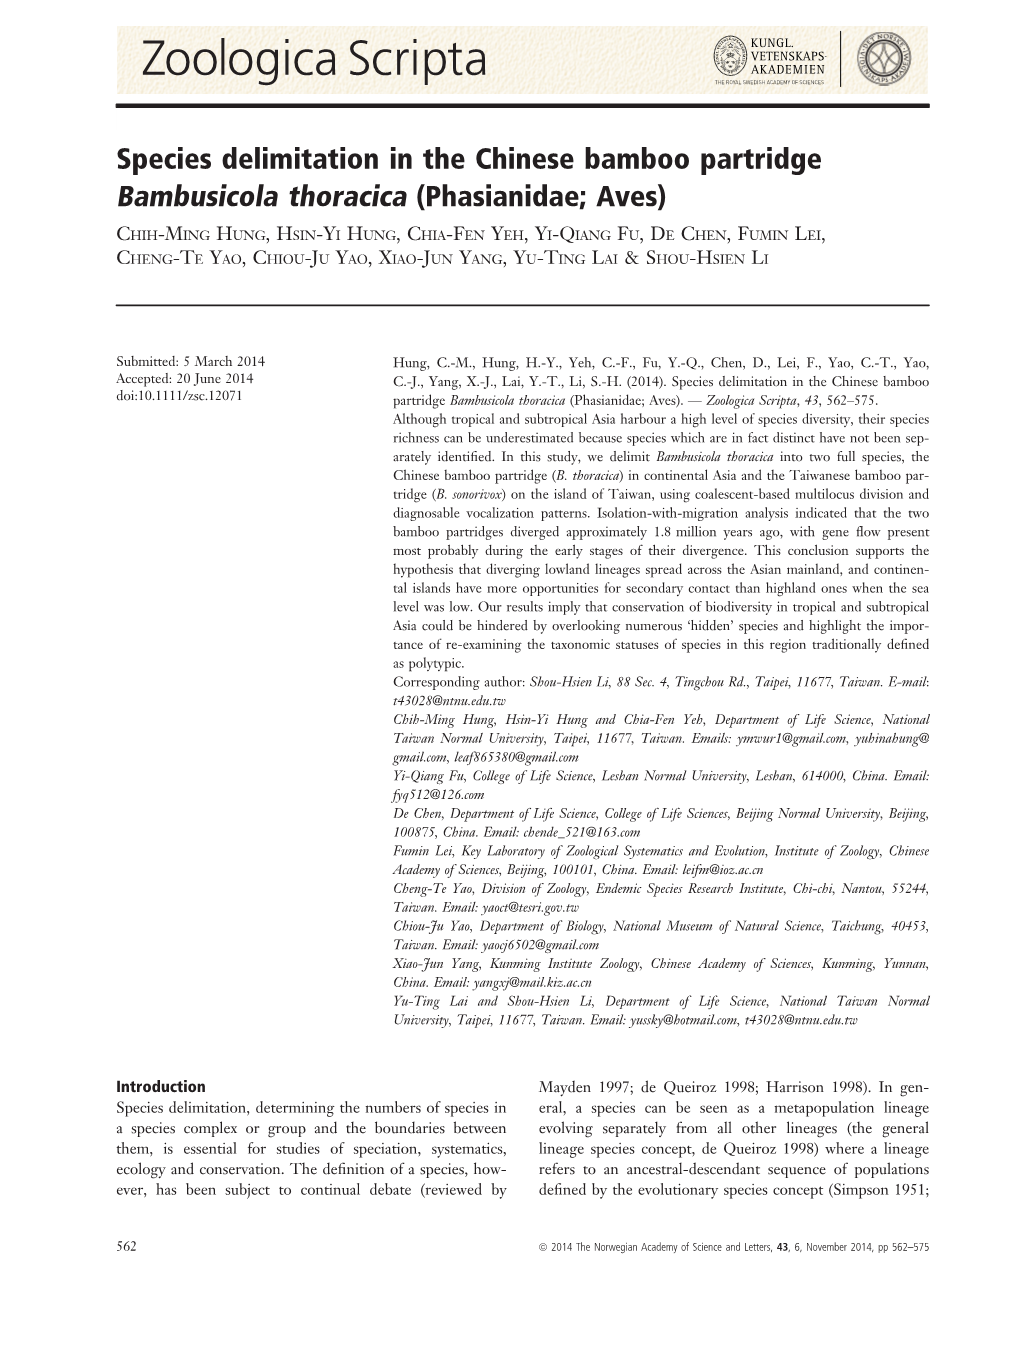 Species Delimitation in the Chinese Bamboo Partridge Bambusicola Thoracica (Phasianidae; Aves)